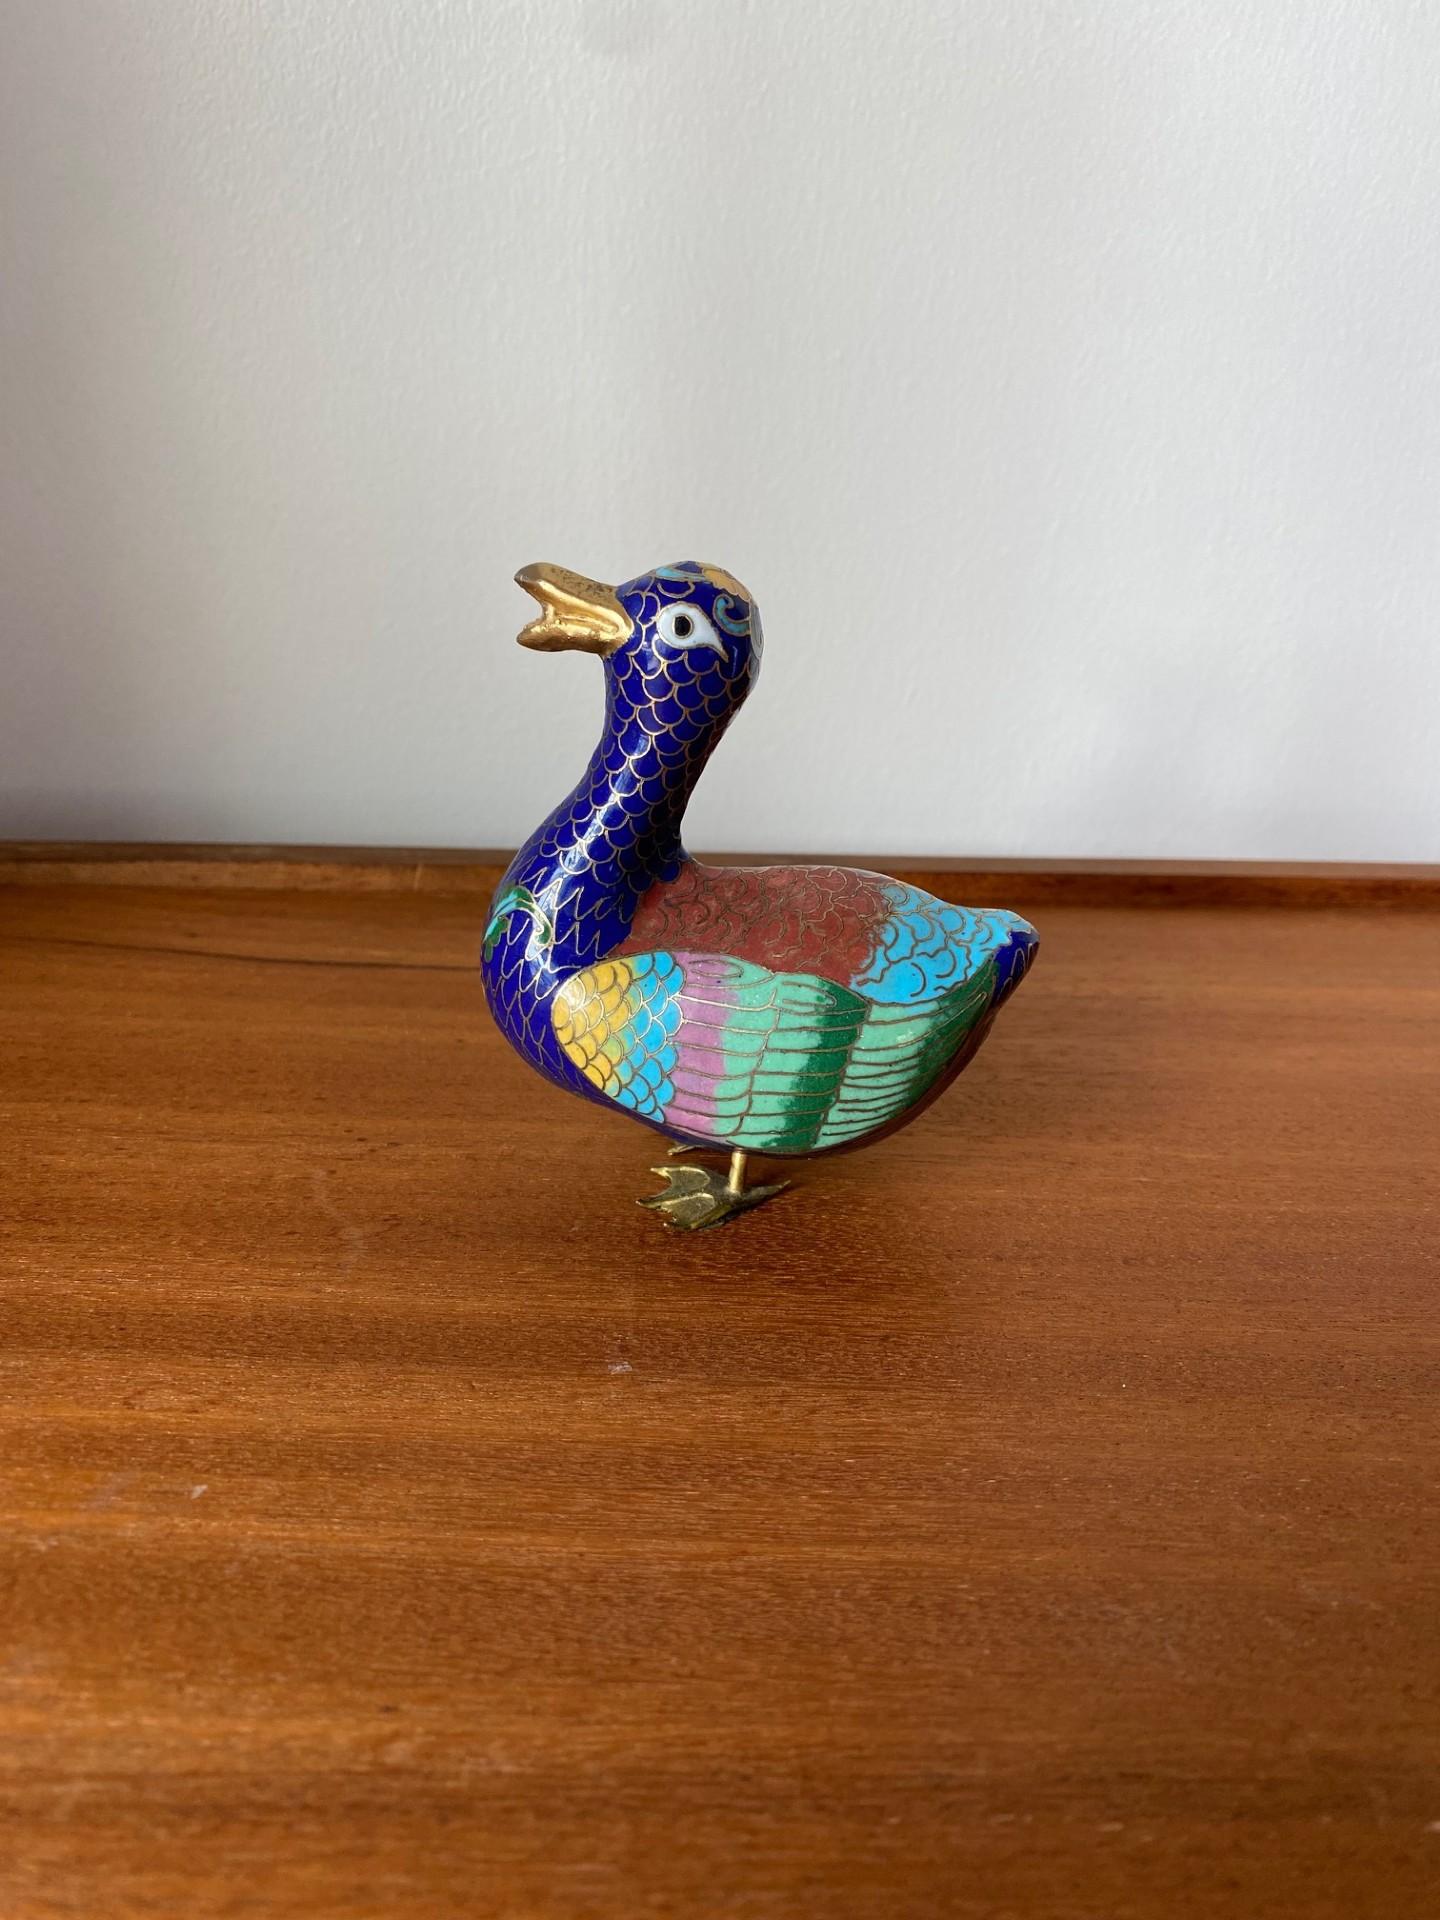 Beautiful vintage asian cloisonne duck figure.  This piece features pink, yellow, blue, green, red and brass hues.  Beautiful figure that will add excitement to any decor and any collector.

Mid-Century, Hollywood Regency, Art Deco, Eclectic,